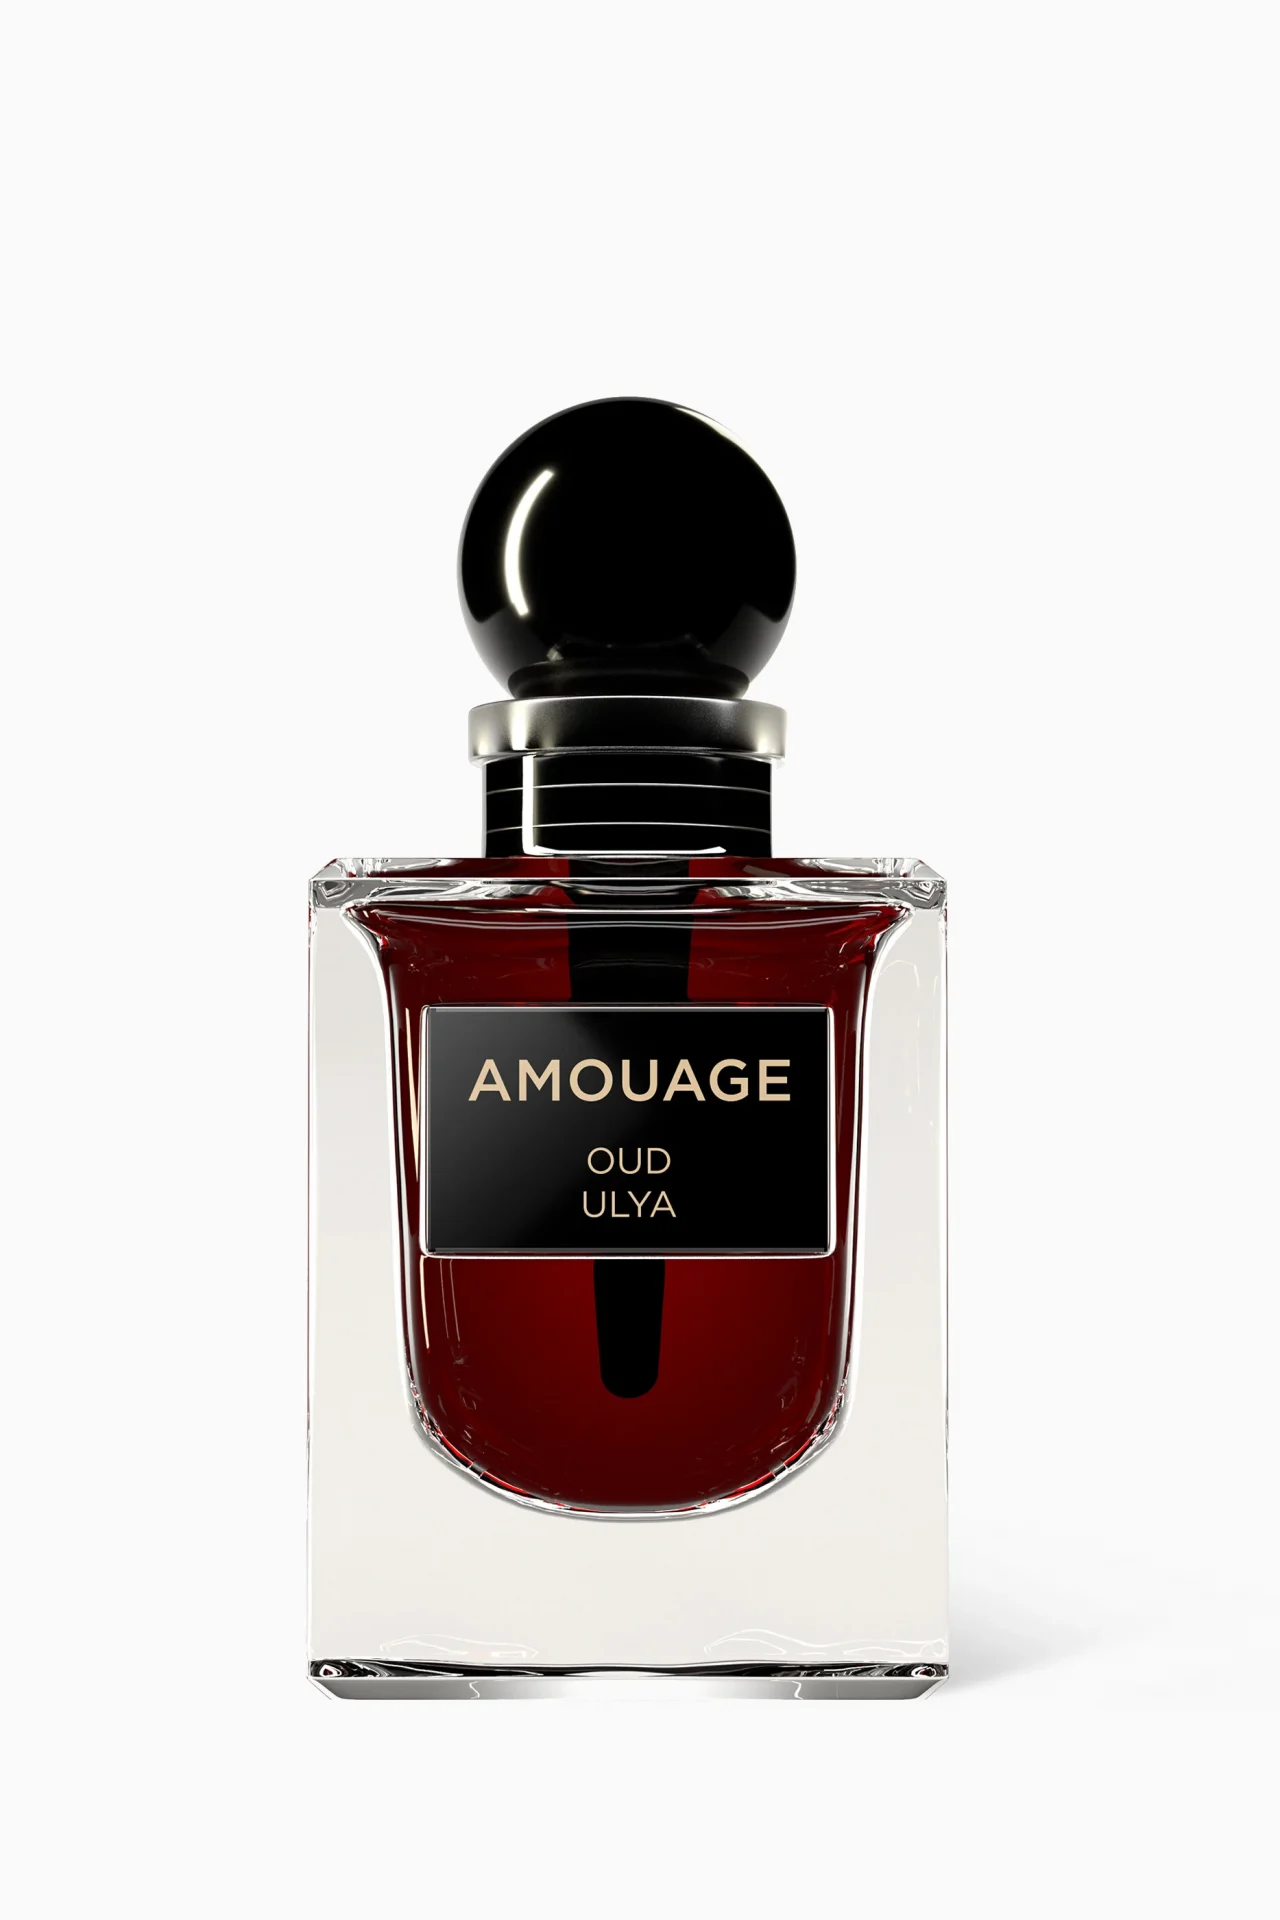 19 of The Best Oud Perfumes For Fragrance Lovers